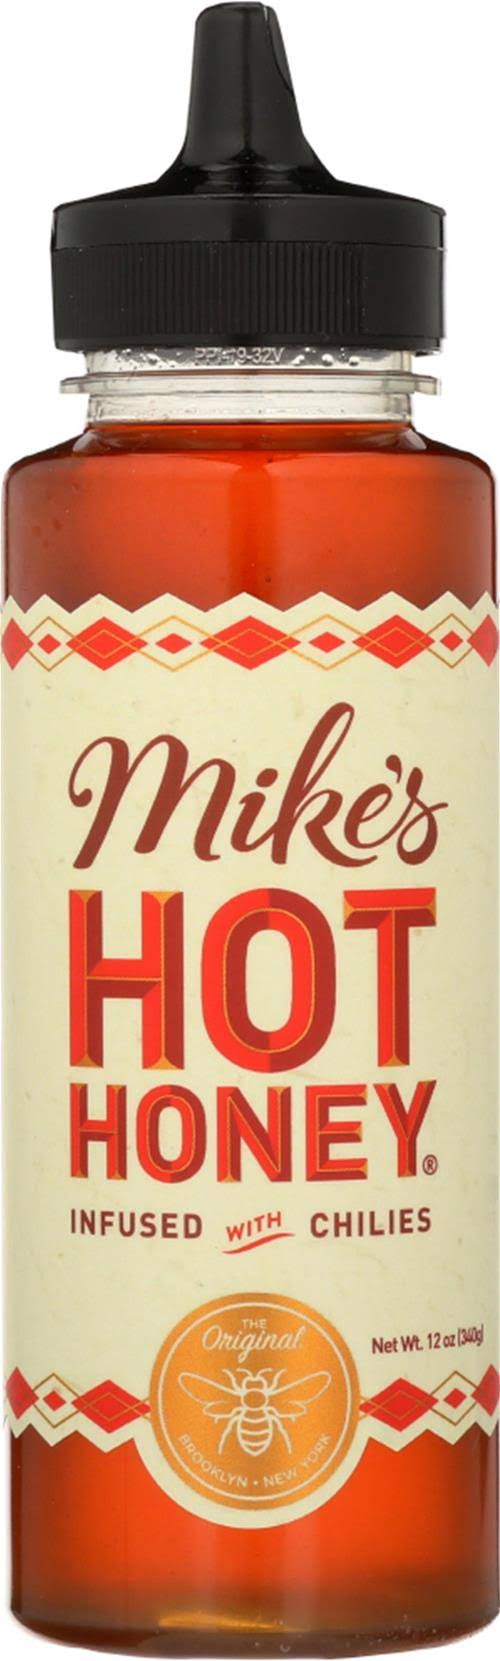 Mikes Hot Honey - Infused With Chilies, 12oz